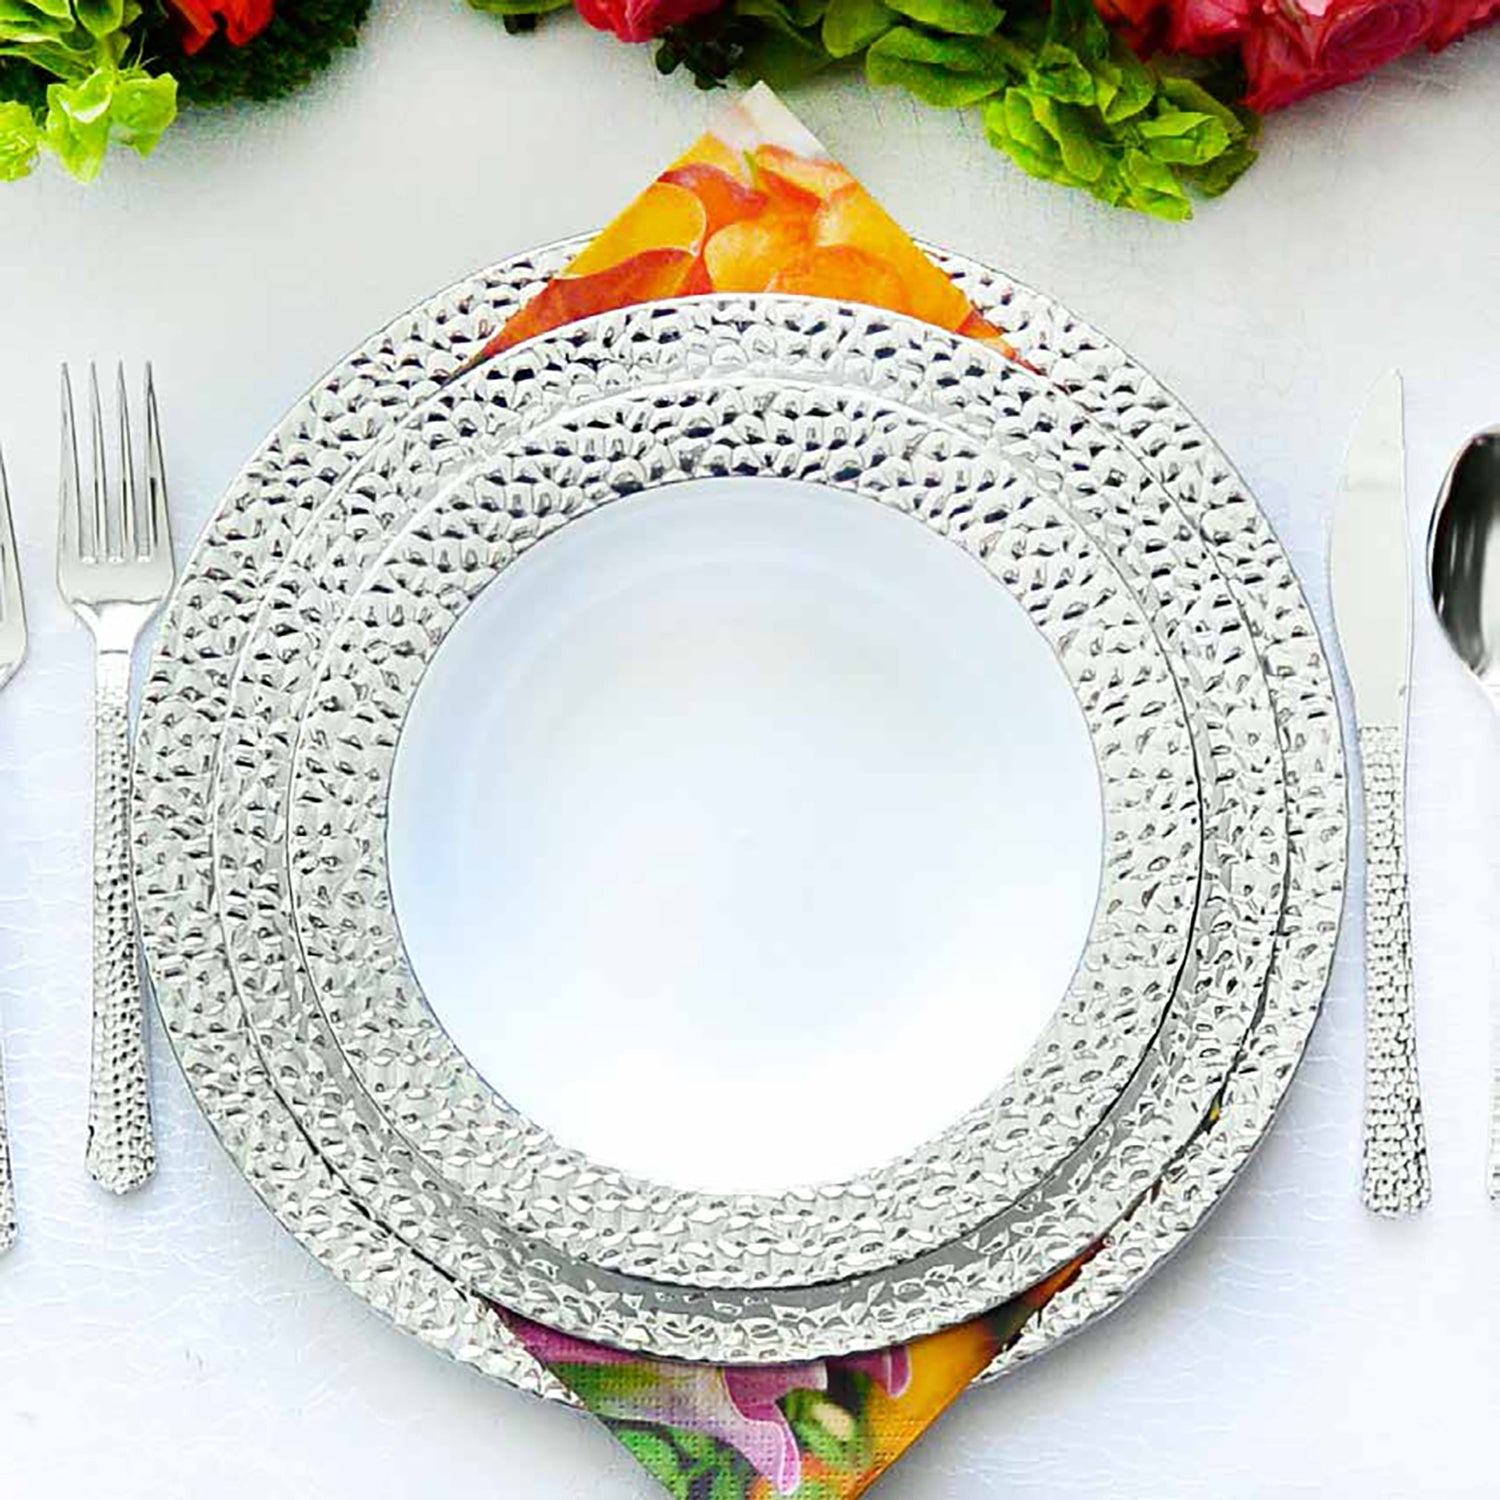 Hammered Collections Salad Dessert Plate White Silver 7.25" 10 count Plates Decorline   